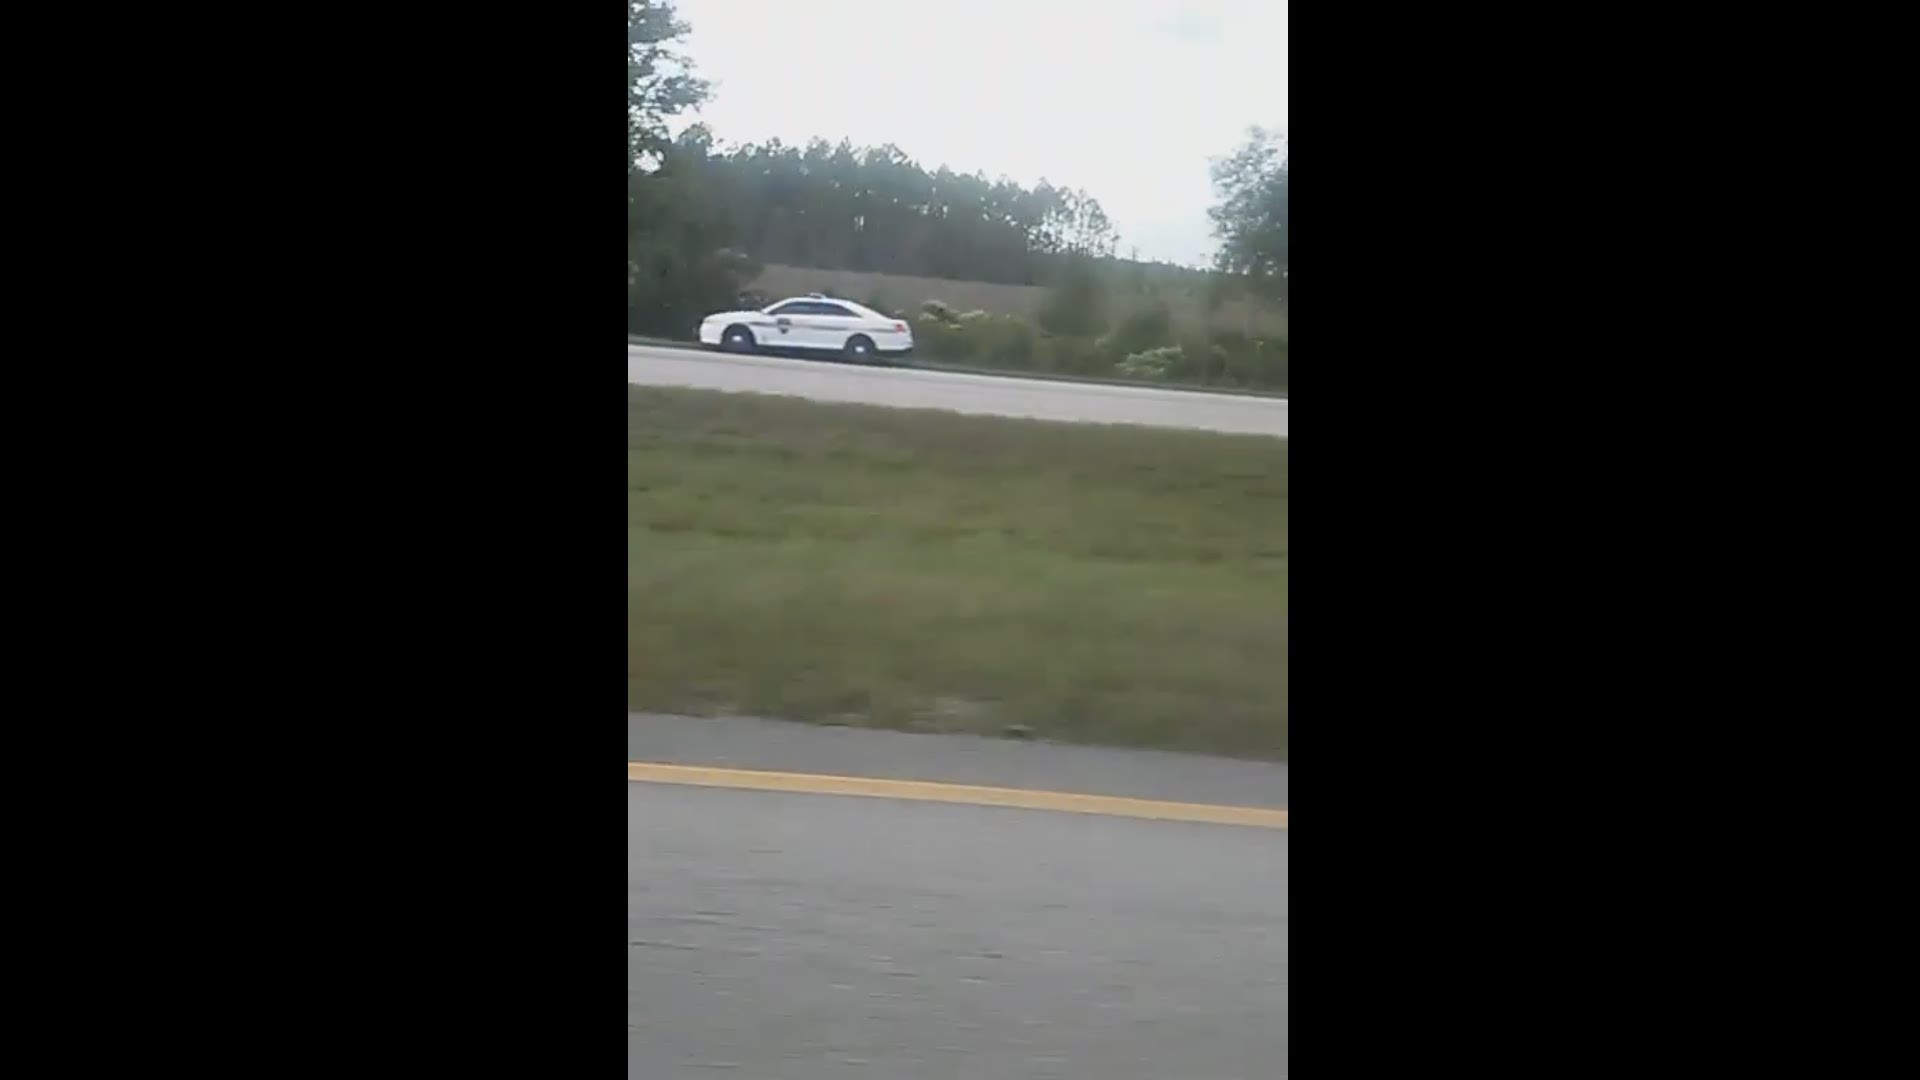 FHP is investigating a traffic incident. A viewer sent the video.